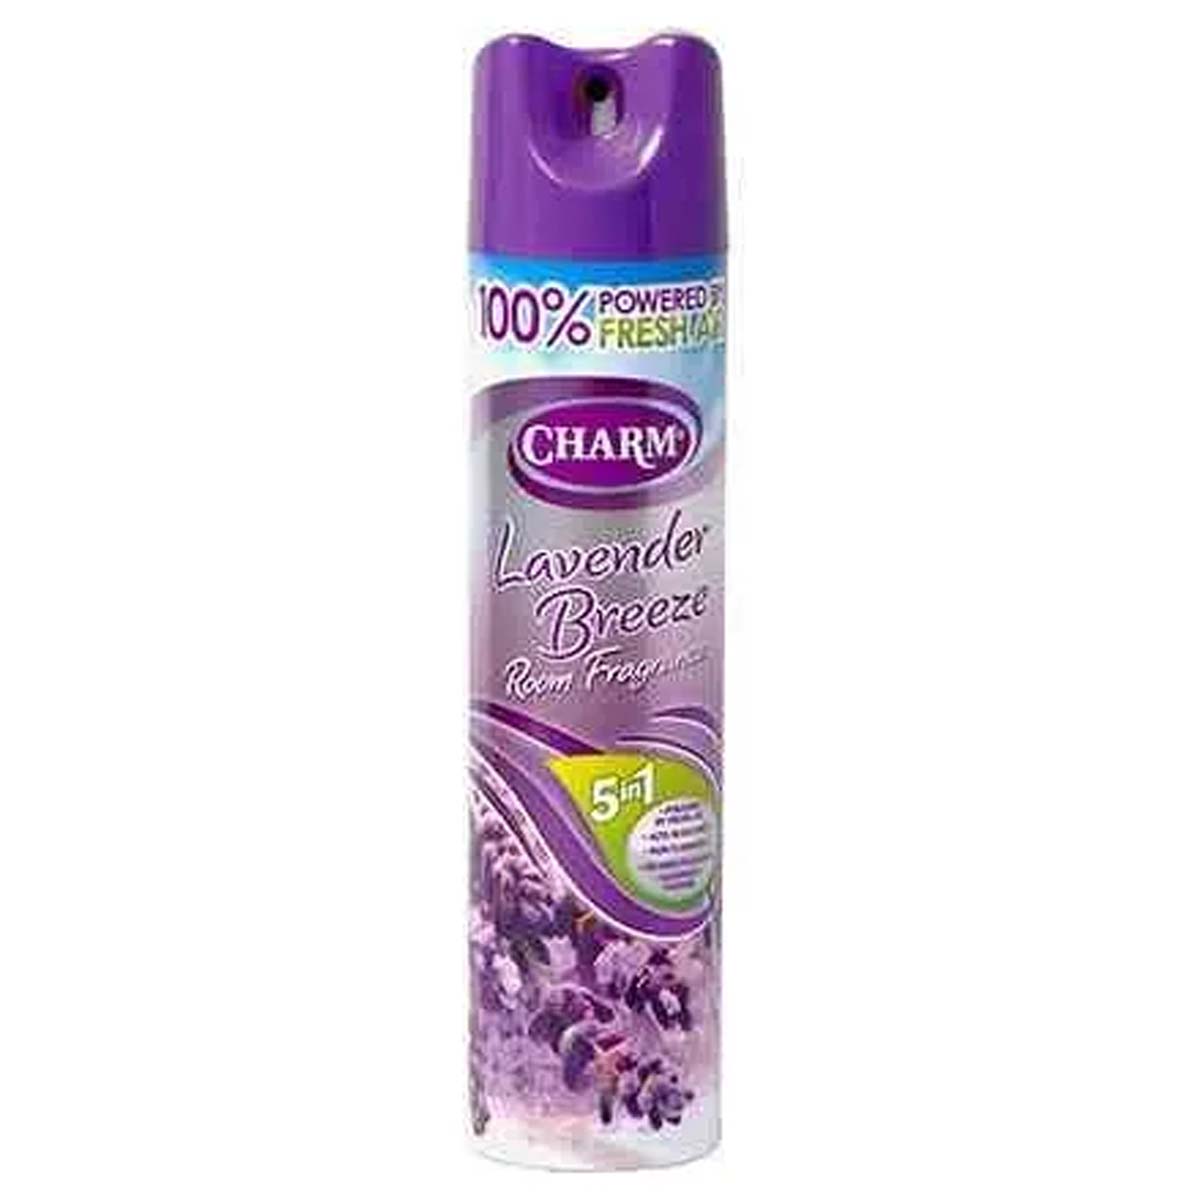 Charm - Lavender Breeze 5 in 1 Air Freshener Room Fragrance - 240ml - Continental Food Store